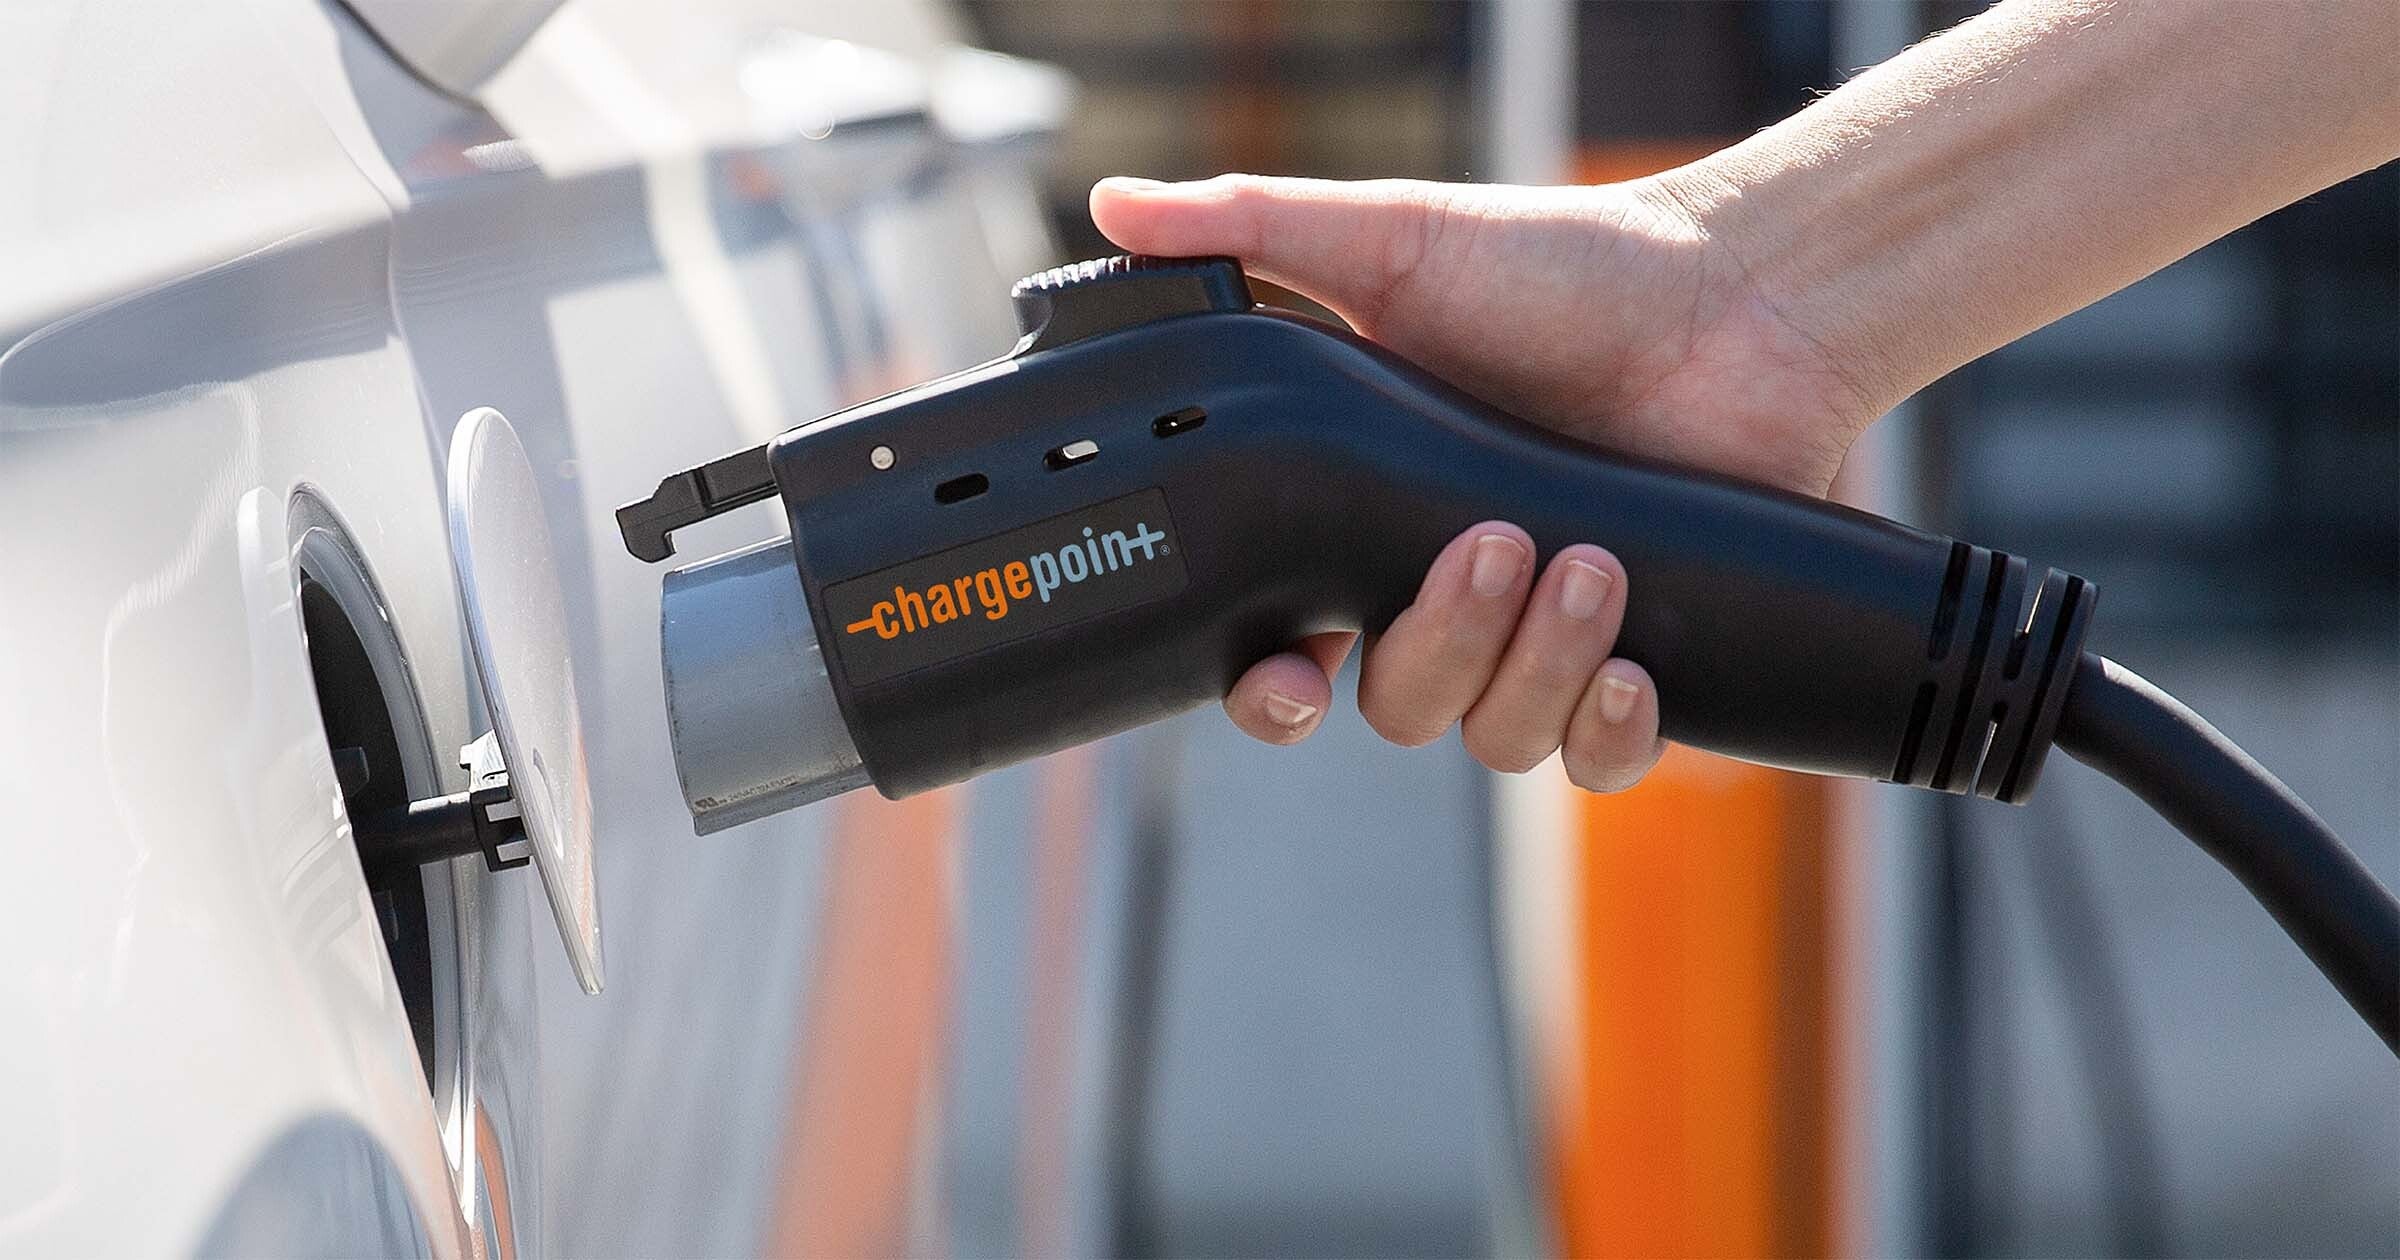 uk.chargepoint.com